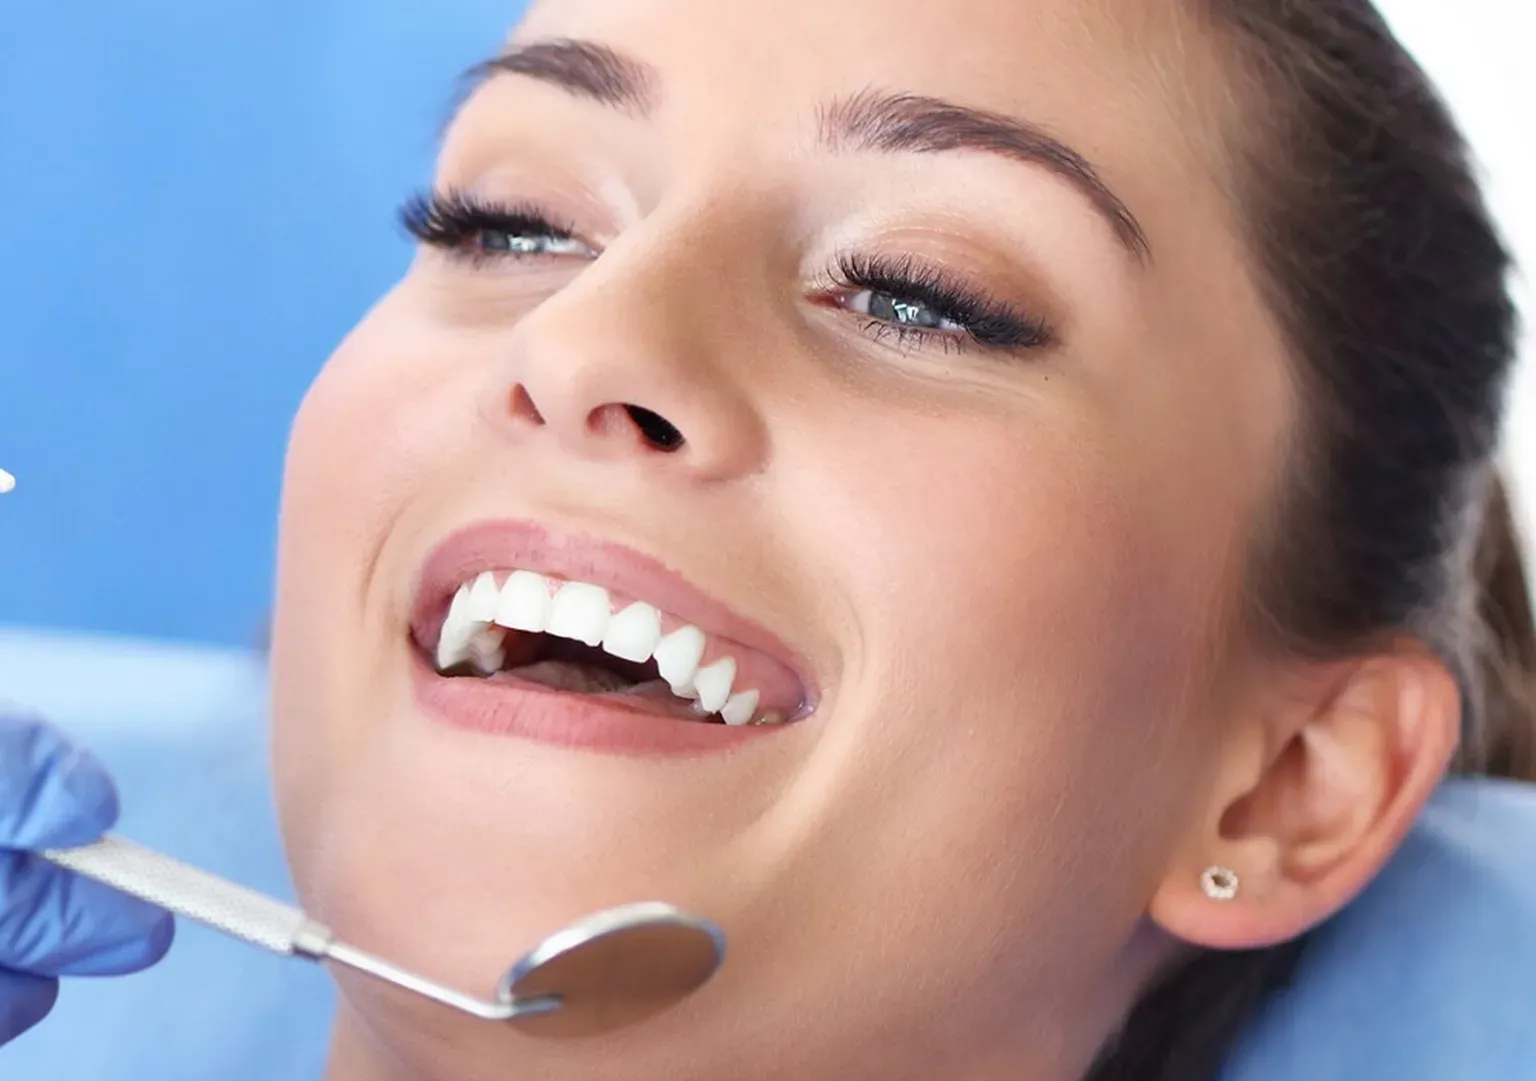 Get The Terrific Smile You’ve Always Wanted With A Professional Smile Makeover In Newport Beach